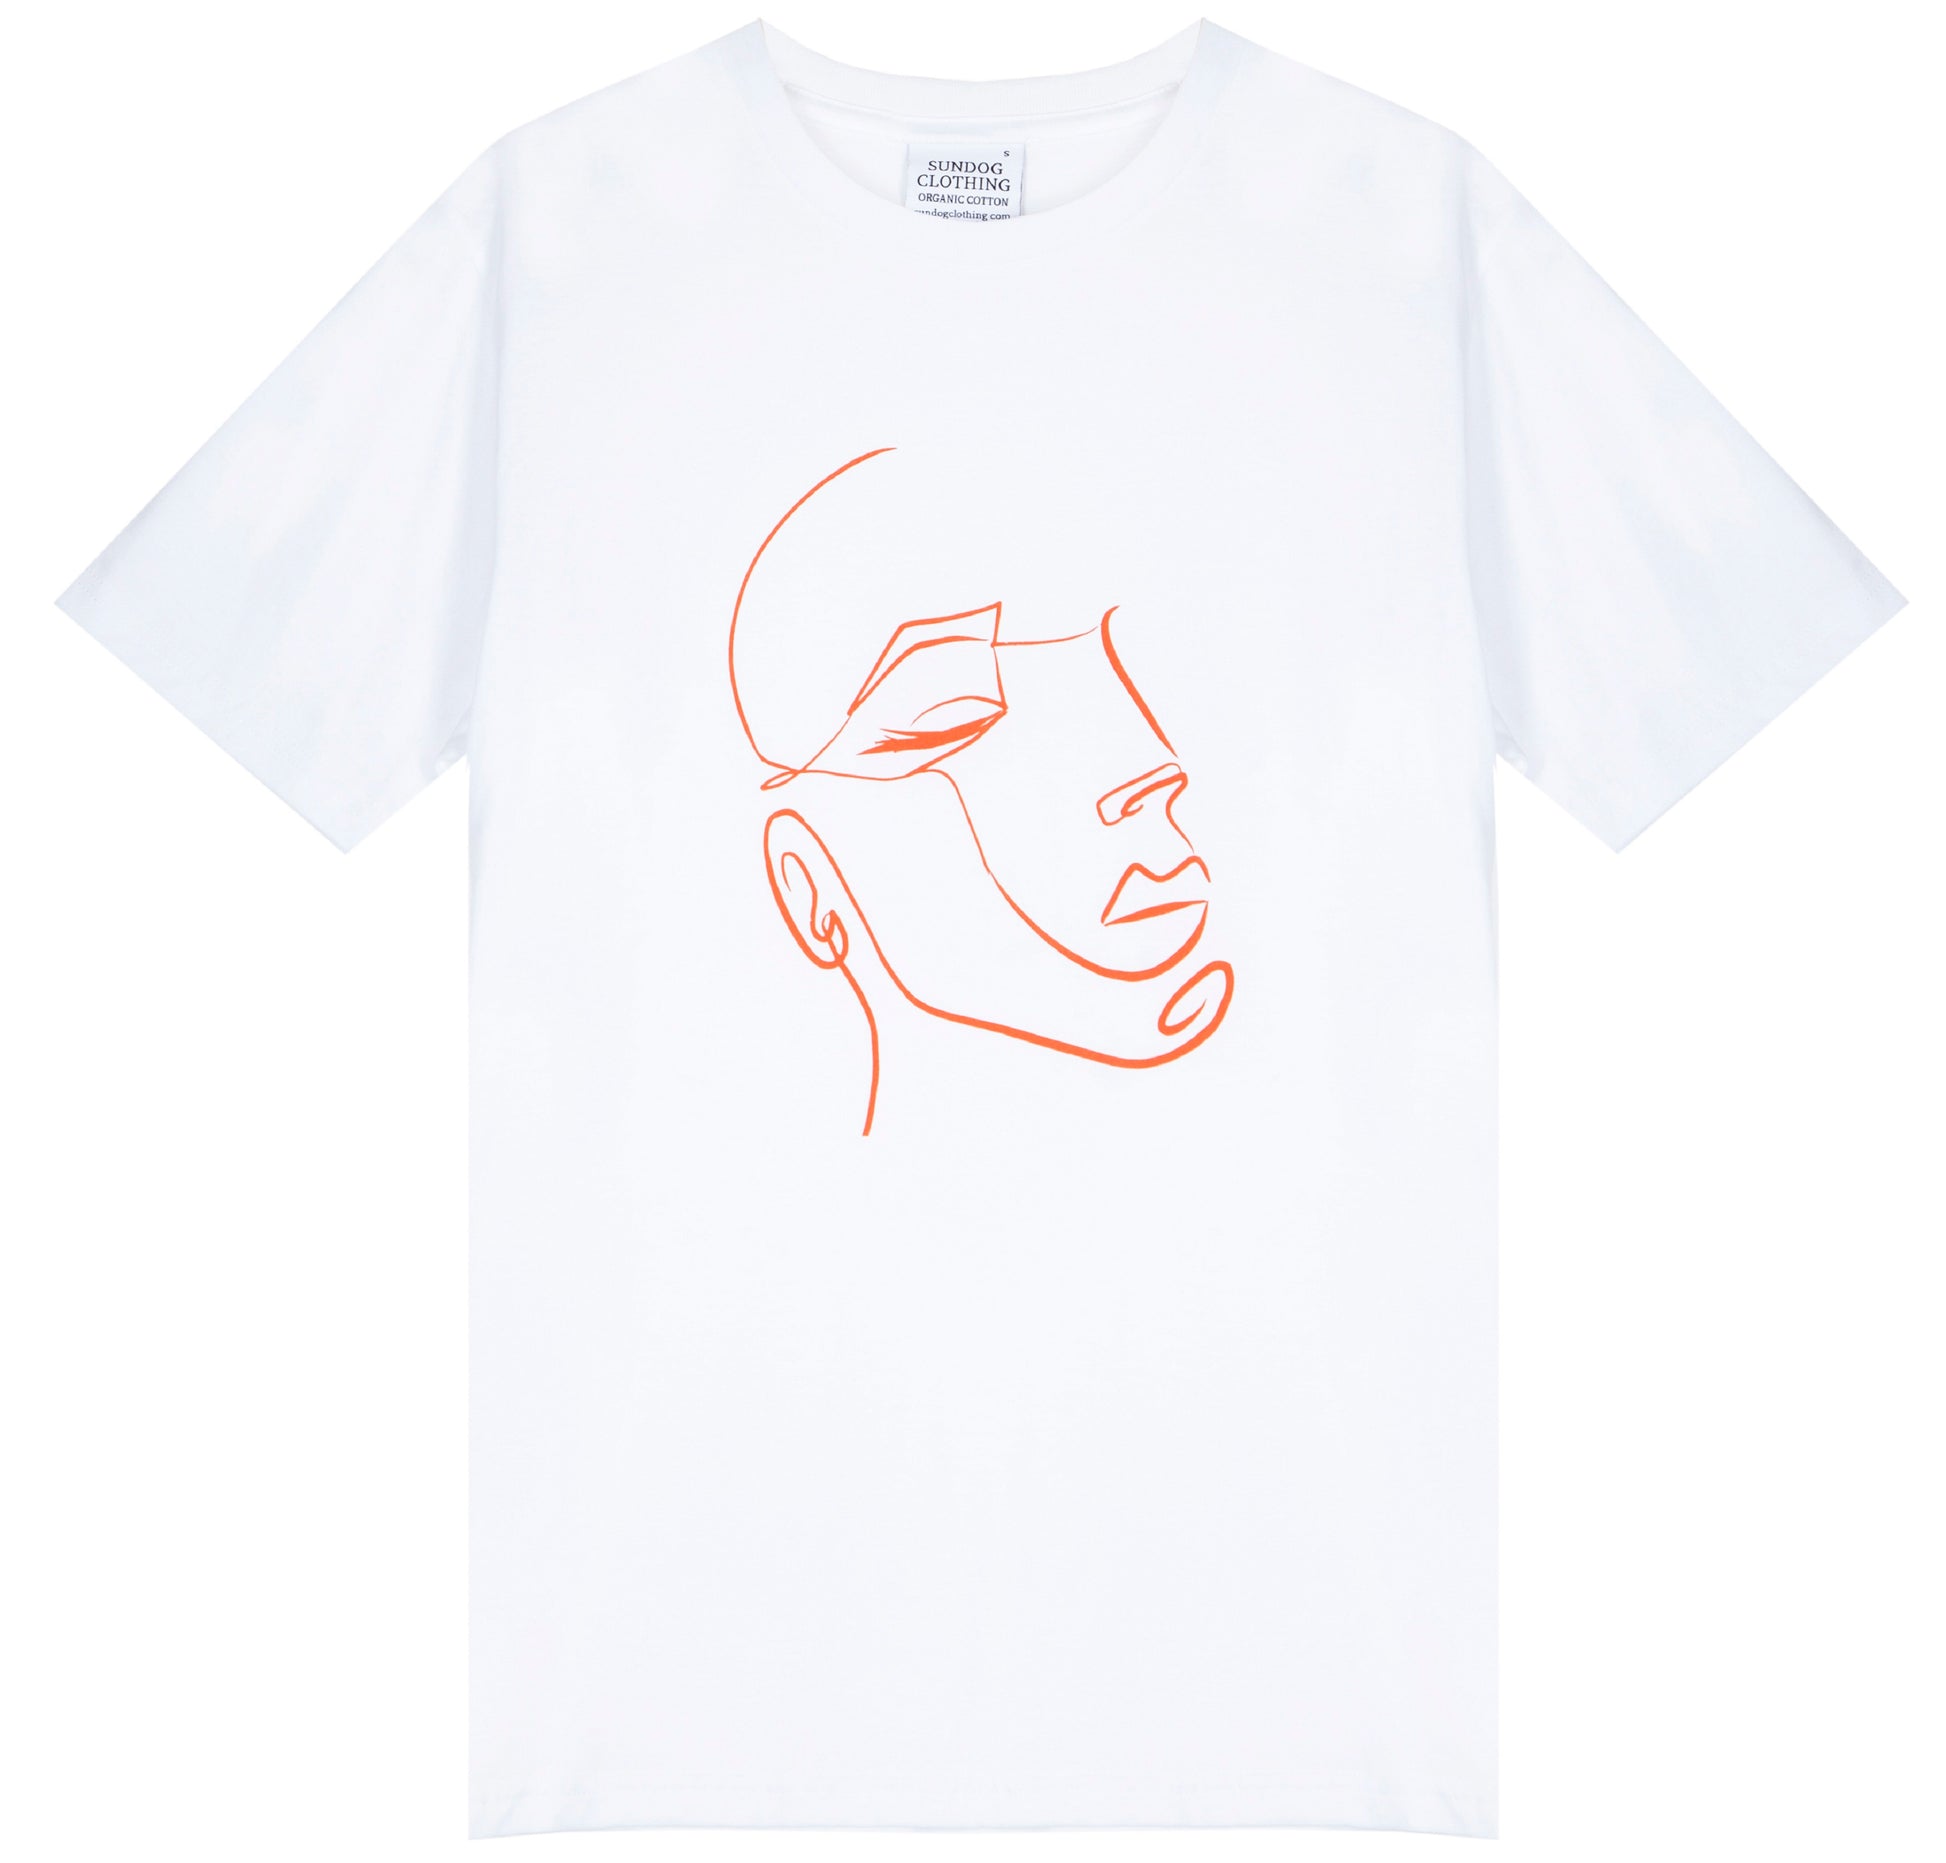 Unisex classic crew white T-shirt, made from GOTS certified organic cotton with FaceIN print in Clementine colour printed with plastic free inks